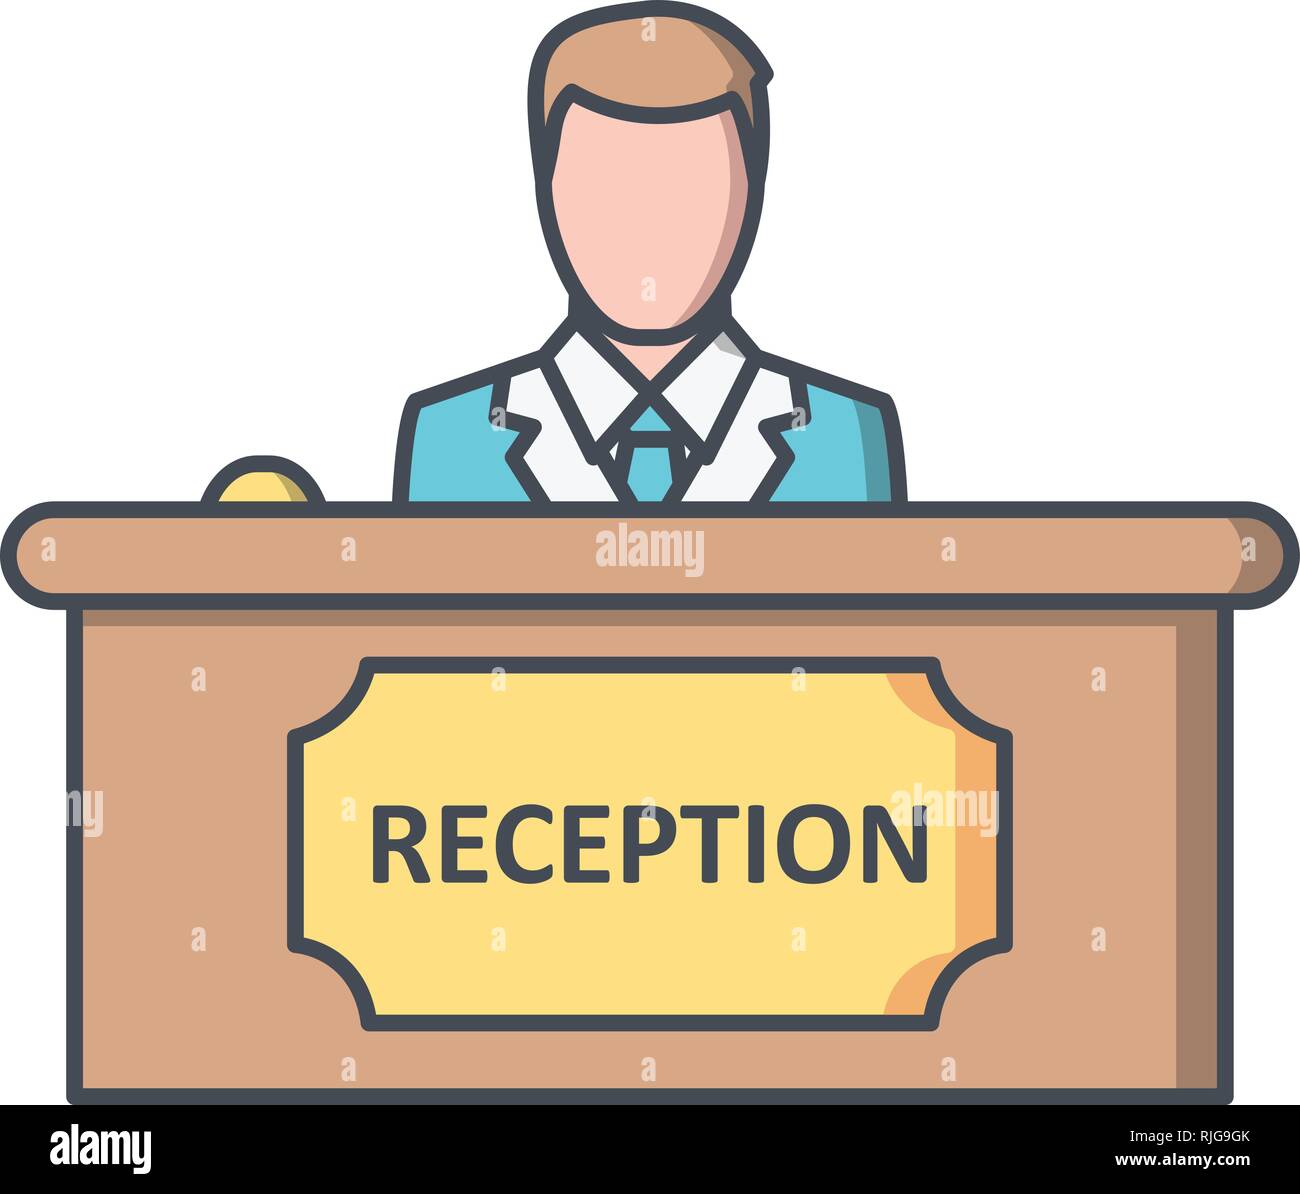 reception vector icon sign icon vector illustration for personal and commercial use clean look trendy icon stock vector image art alamy https www alamy com reception vector icon sign icon vector illustration for personal and commercial use clean look trendy icon image235157347 html